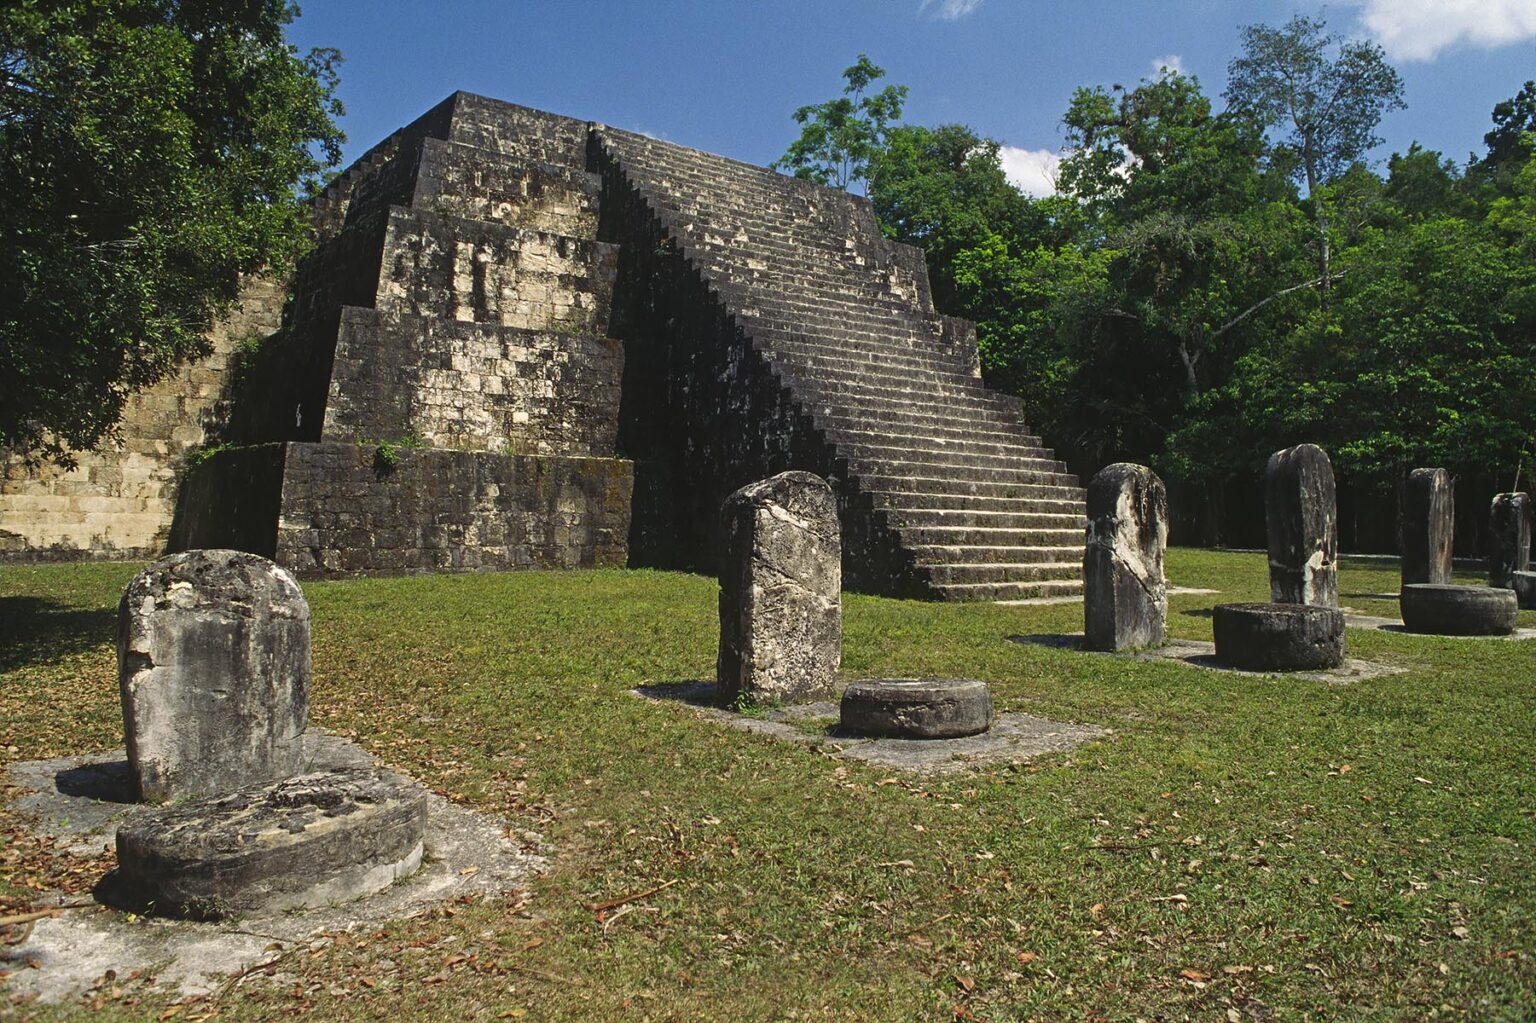 PYRAMID Q COMPLEX, built by CHITAM in 1771 AD, with STELAE and ALTERS  of MAYA RULERS - TIKAL, GUATEMALA